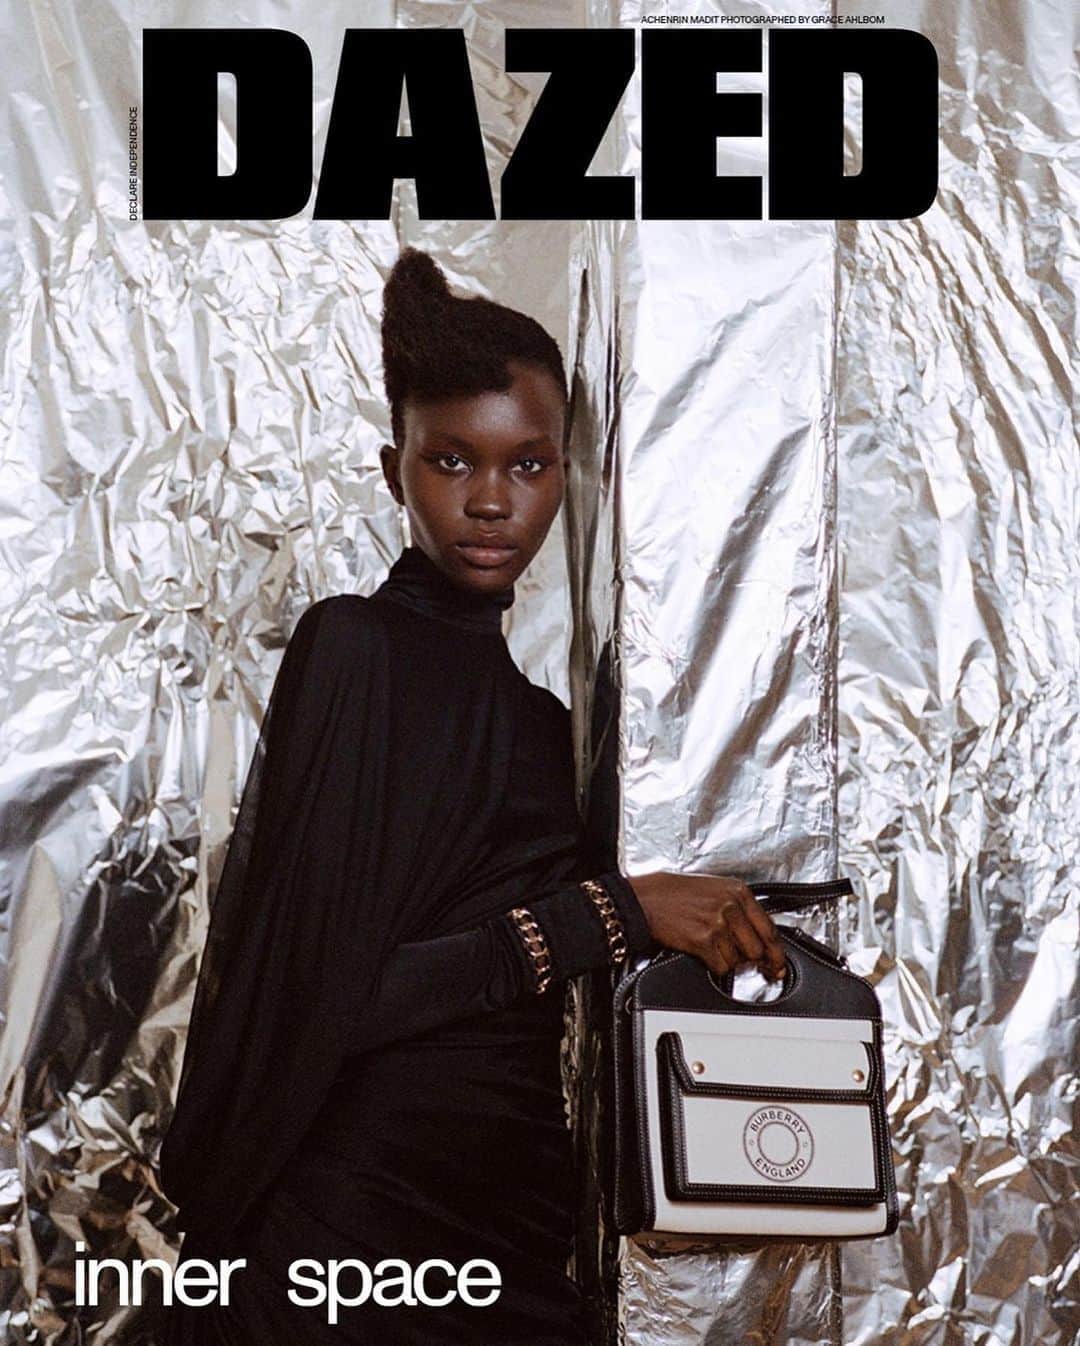 AnOther Magazineさんのインスタグラム写真 - (AnOther MagazineInstagram)「The new issue of @dazed is out now 💫⁠⠀ ⁠⠀ The Read Up, Act Up Autumn/Winter 2020 issue of Dazed compiles six guest-edits, together forming one evolving document examining the present to create new futures. Find out more at the link in our bio 📲⁠⠀ ⁠⠀ 1) Guest-editor #Noname, artwork @jazzgrantstudio, text @overdramatique, #StephenWilson⁠⠀⁠⠀ 2) Guest-editor @walesbonner⁠, text @clairemahealy⁠⠀⁠⠀ 3) Guest-editor and artwork @design.by.samuelross⁠, animation @evv.nazarova, music @mosesboydexodus Untitled999⁠⠀ 4) Guest-editor @anonymousclub.club⁠, photography by @sicknethi⁠, text @lucasmascatello⁠⁠⠀ 5) Guest-editor @janayathefuture⁠, artwork @dcwdor⁠, text @oteghauwagba⁠⠀⁠⠀ 6) Guest-editor @wideawakes2020⁠, artwork @hankwillisthomas⁠, text @jammallemy, @hankwillisthomas, @ericgottesman, @joseparla, @jammallemy, @traceyryans, @wildcatebonybrown, @sirtonypatrick, @carly_fisher, @mecca_brooks⁠⠀ 7) Photography by @sk8rmom420⁠, styling @emmawyman⁠⠀ ⠀⁠⠀」9月17日 21時32分 - anothermagazine